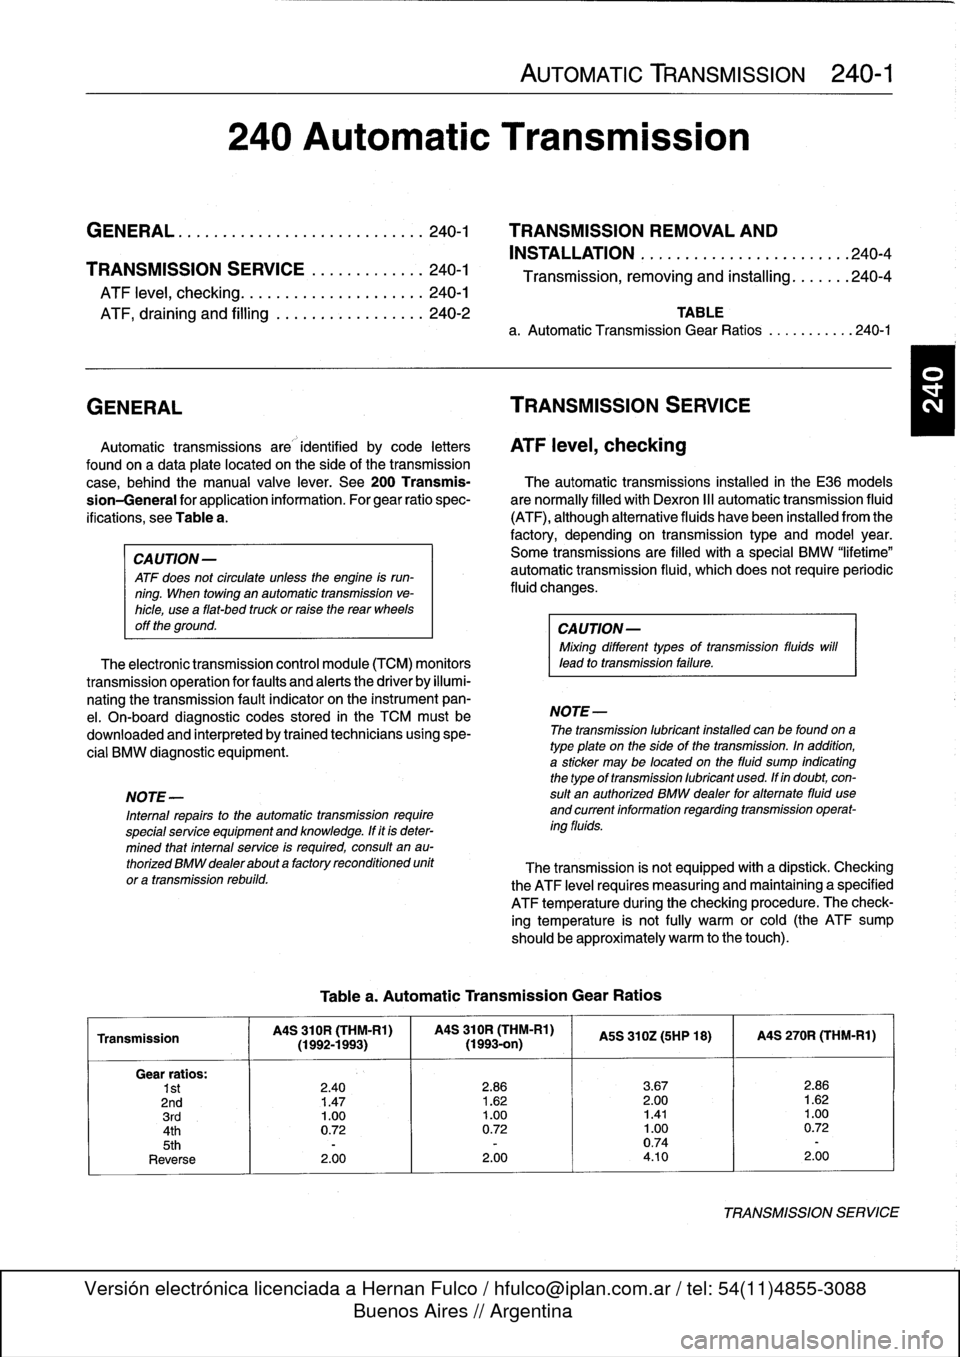 BMW M3 1993 E36 Workshop Manual 
AUTOMATIC
TRANSMISSION

	

240-1

240
Automatic
Transmission

GENERAL
.....
.
.
.
.
.
.
.
.
.
.
.
.
.
.........
.
240-1

	

TRANSMISSION
REMOVAL
AND

INSTALLATION
..................
.
.
.
.
.240-4
TR